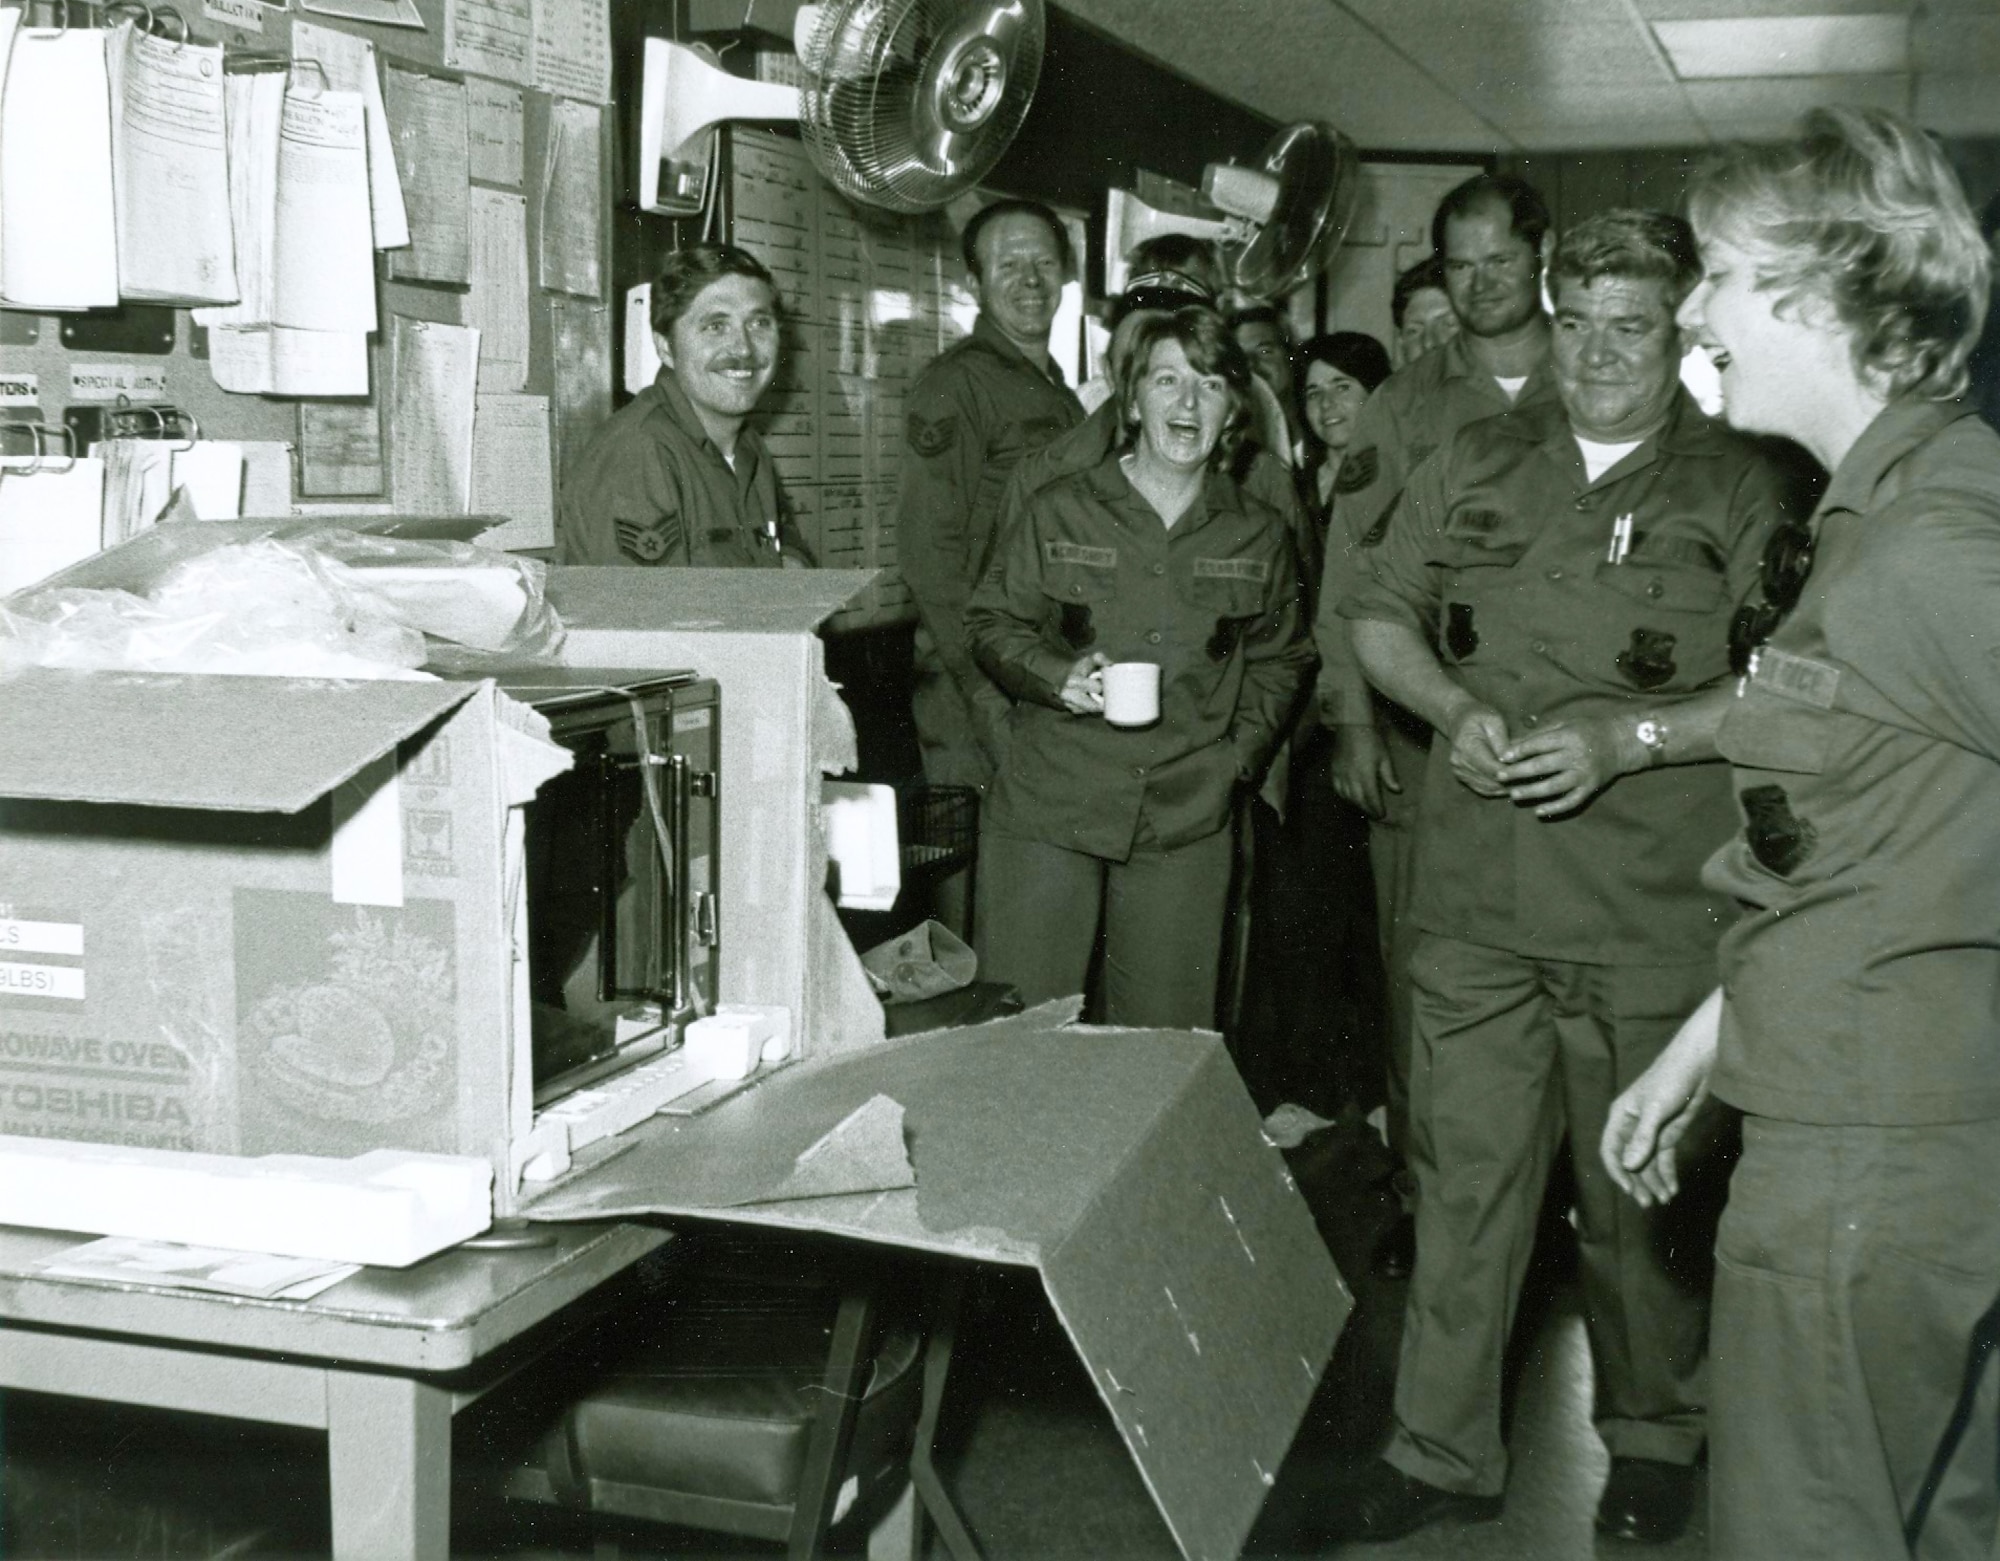 Fellow unit members present a microwave oven to then Staff Sgt. Brenda West in 1983. West’s coworkers, trying to lift her spirits after her mother passed away, gathered money for flowers and raised enough to purchase the new oven instead. (Courtesy photo)